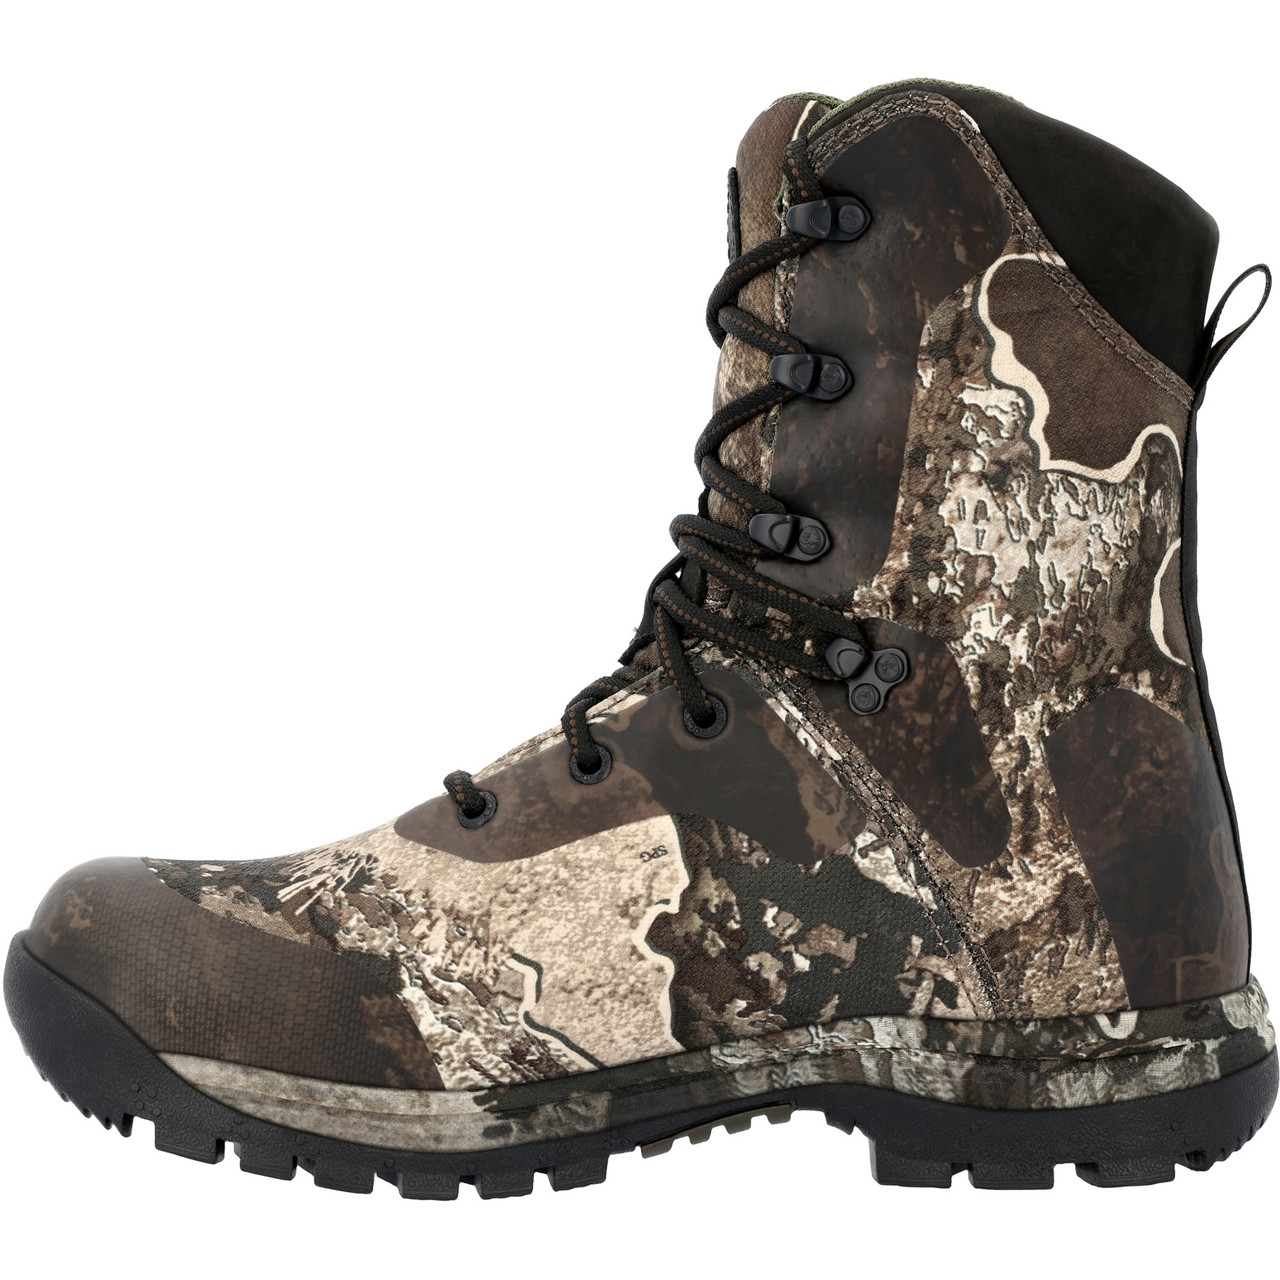 ROCKY LYNX 400G INSULATED OUTDOOR BOOTS RKS0628